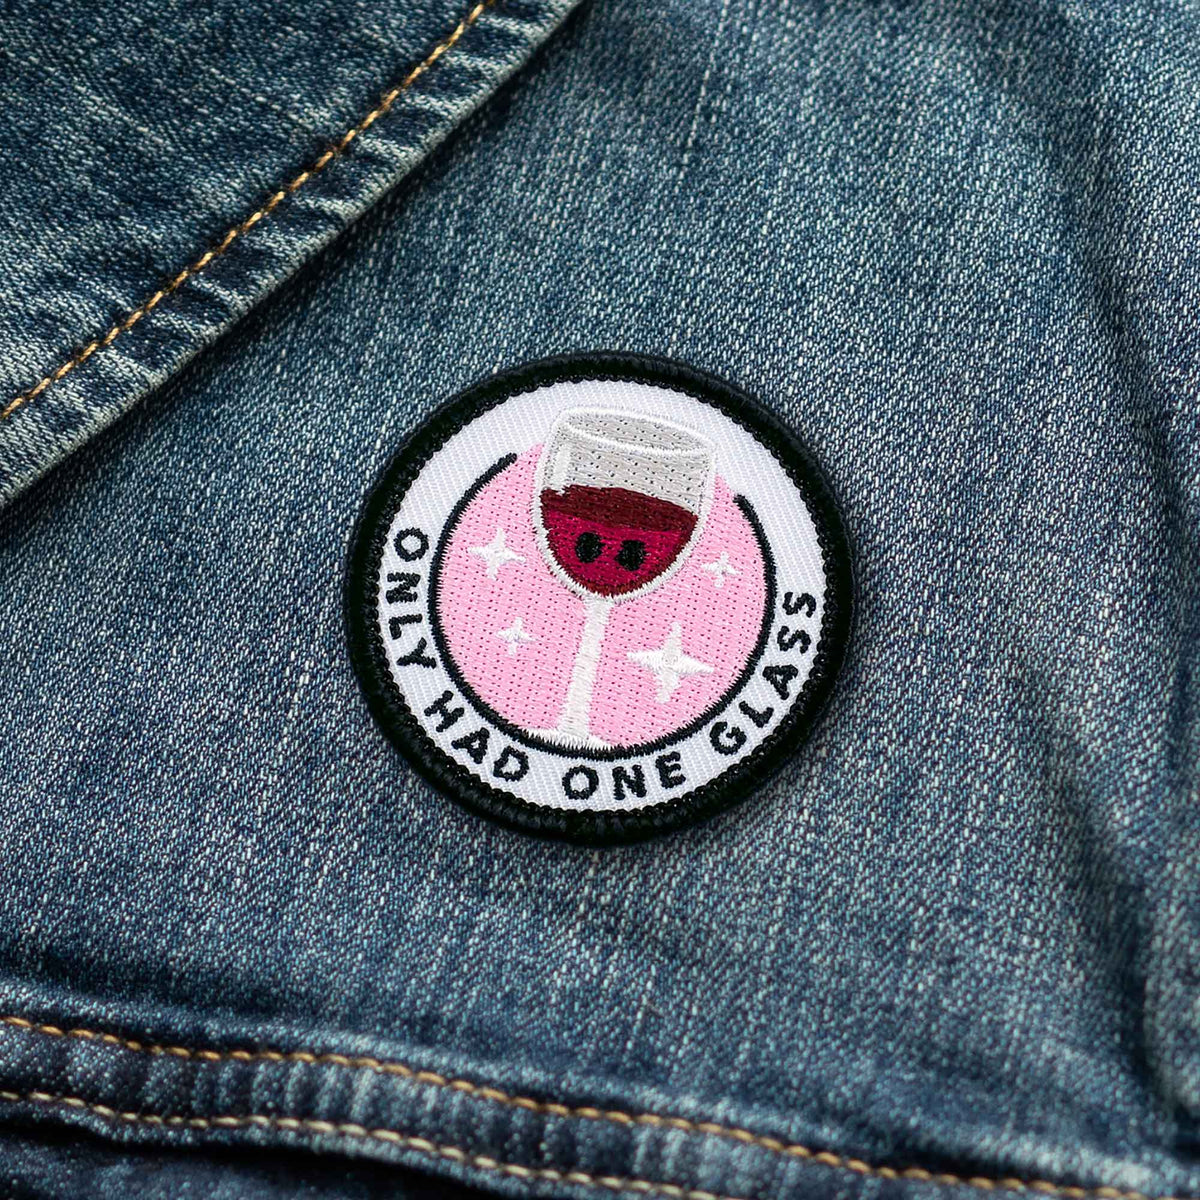 Only Had One Glass adulting merit badge patch for adults on denim jacket